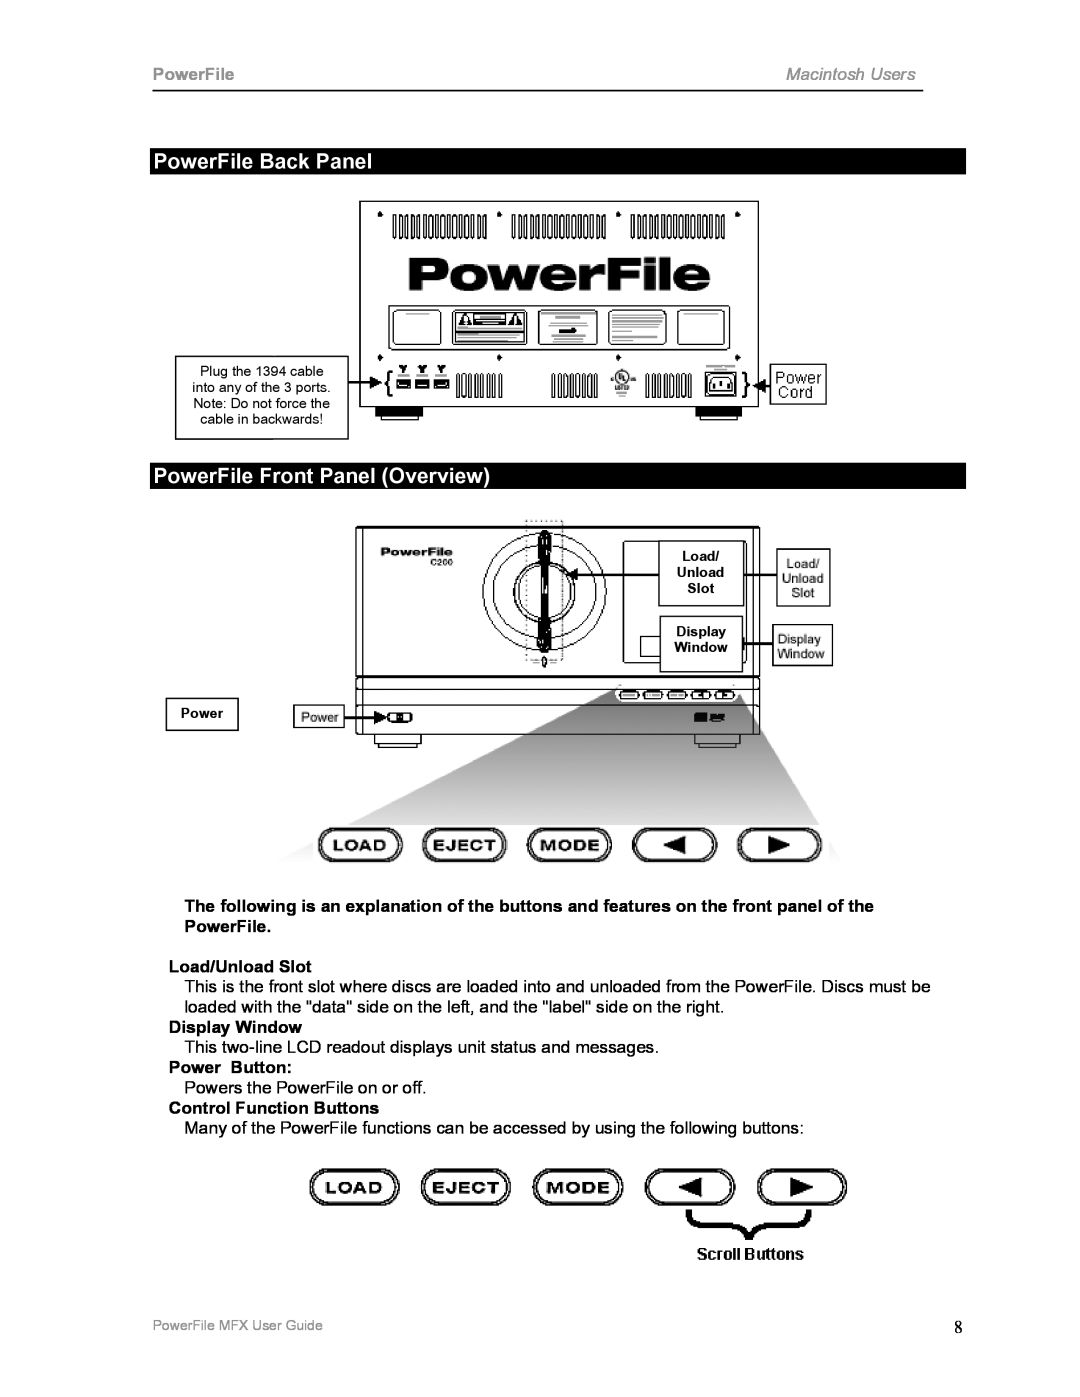 PowerFile C200 manual PowerFile Back Panel, PowerFile Front Panel Overview, Load/Unload Slot, Display Window, Power Button 